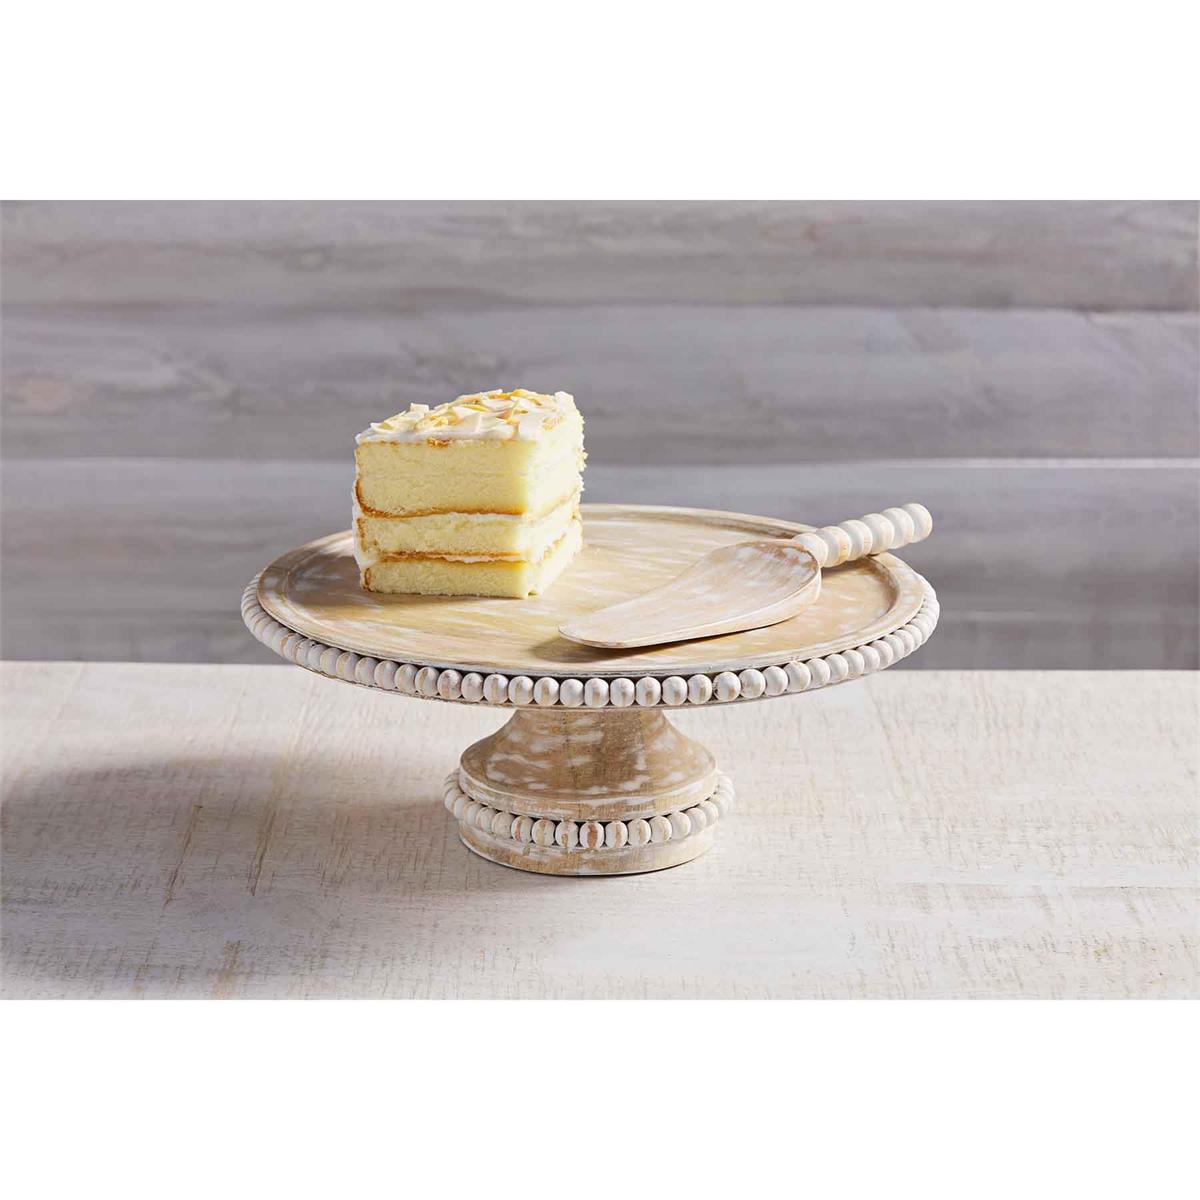 wooden beaded cake stand displayed with a slice of cake on a white wooden surface